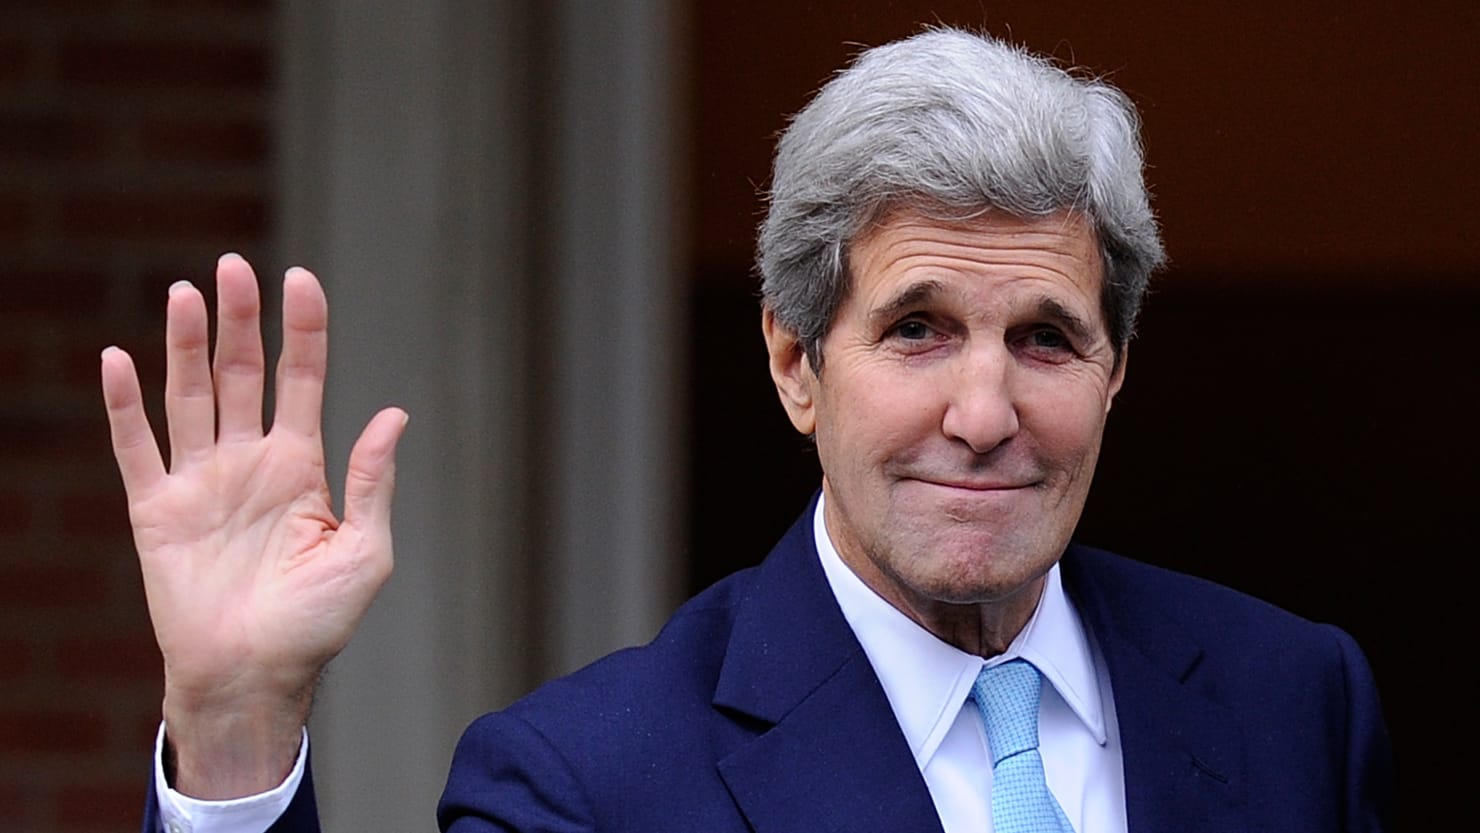 John Kerry Gearing Up to Depart White House Report